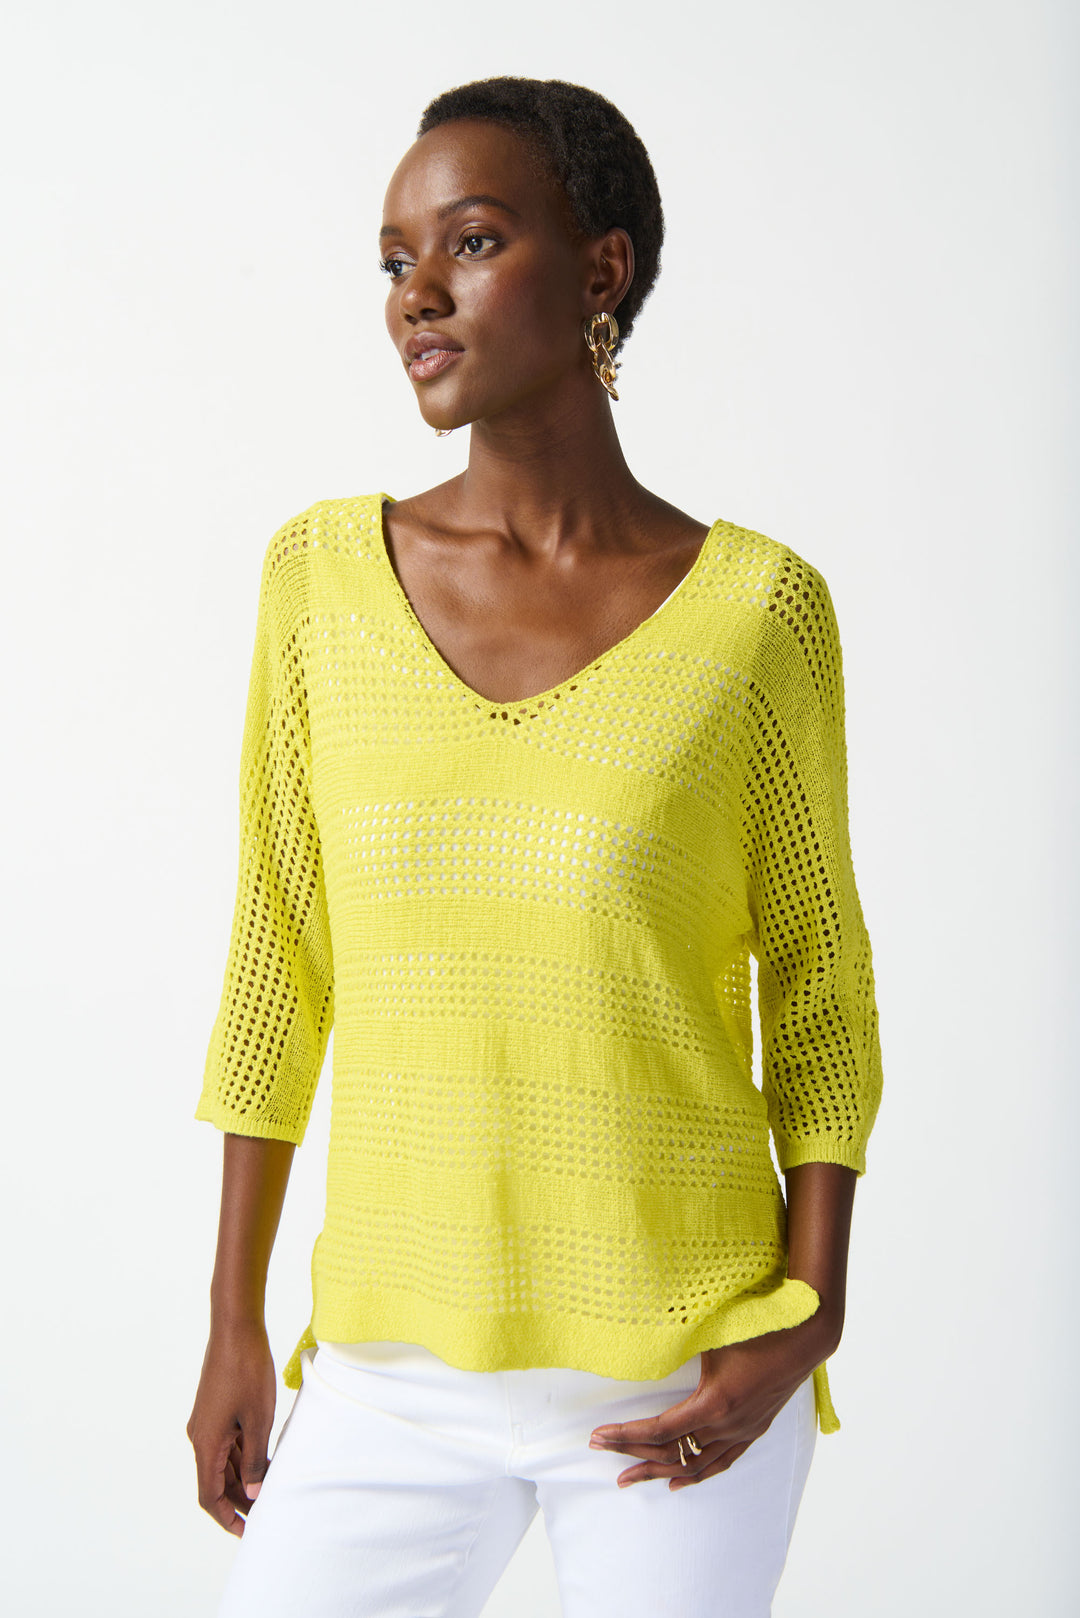 Soft cut V-neck and open stitch design create an artistic pattern, while 3/4 length dolman sleeves keep it light and comfy.